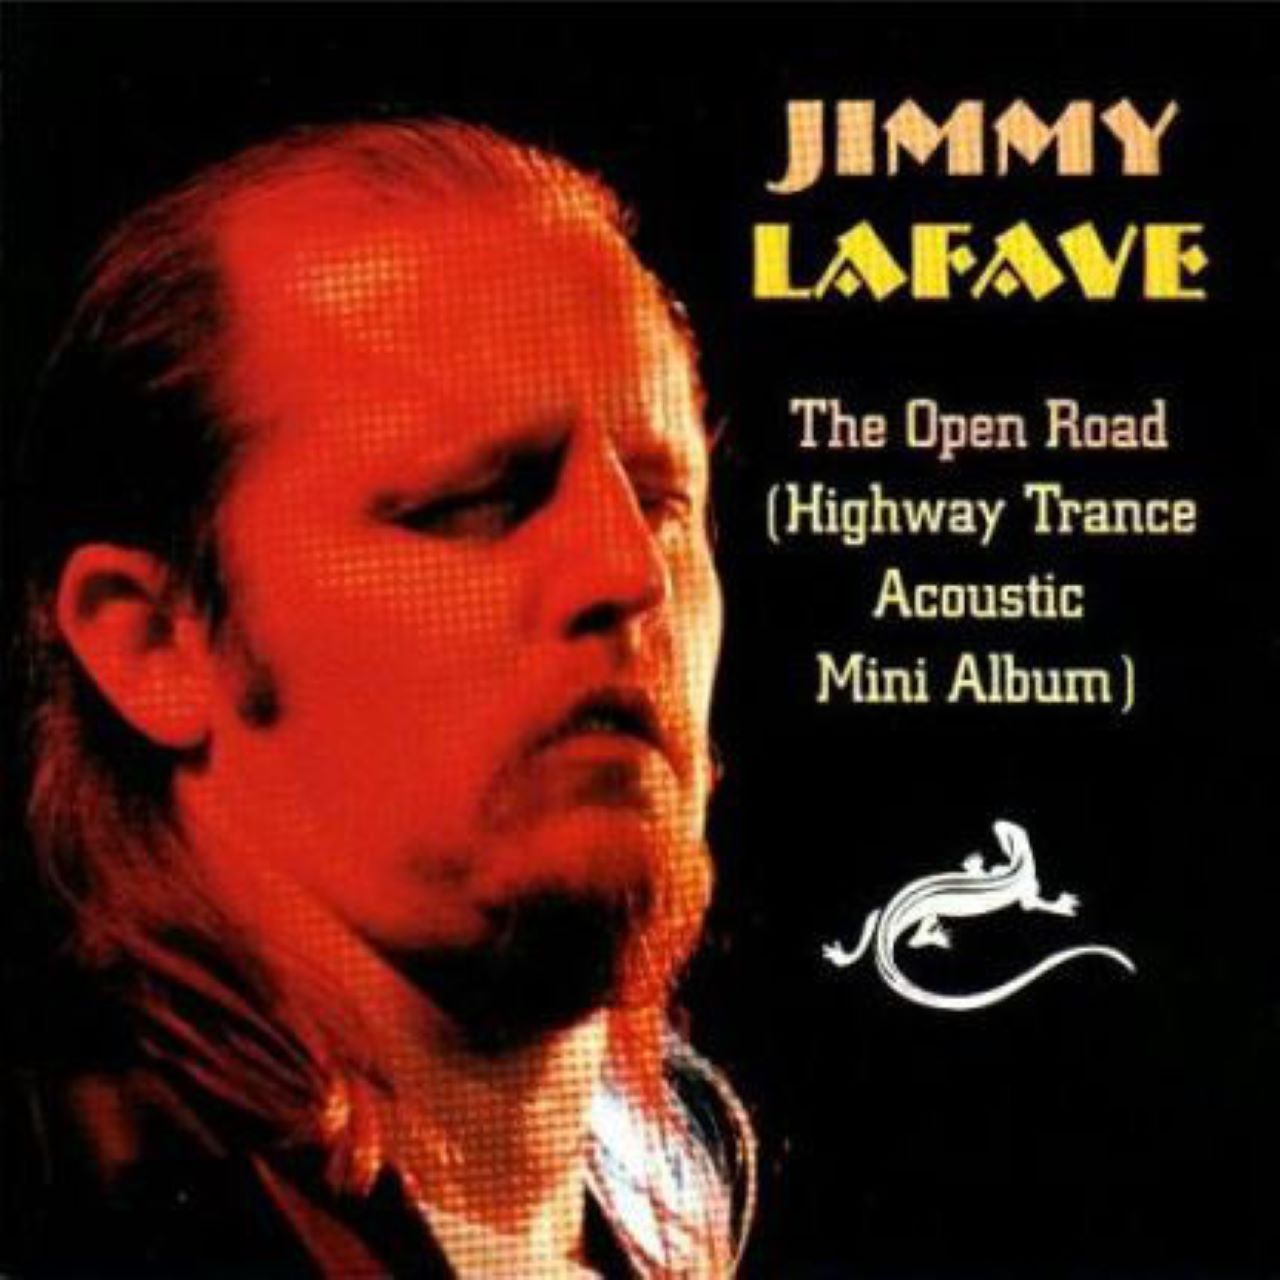 Jimmy LaFave - The Open Road cover album